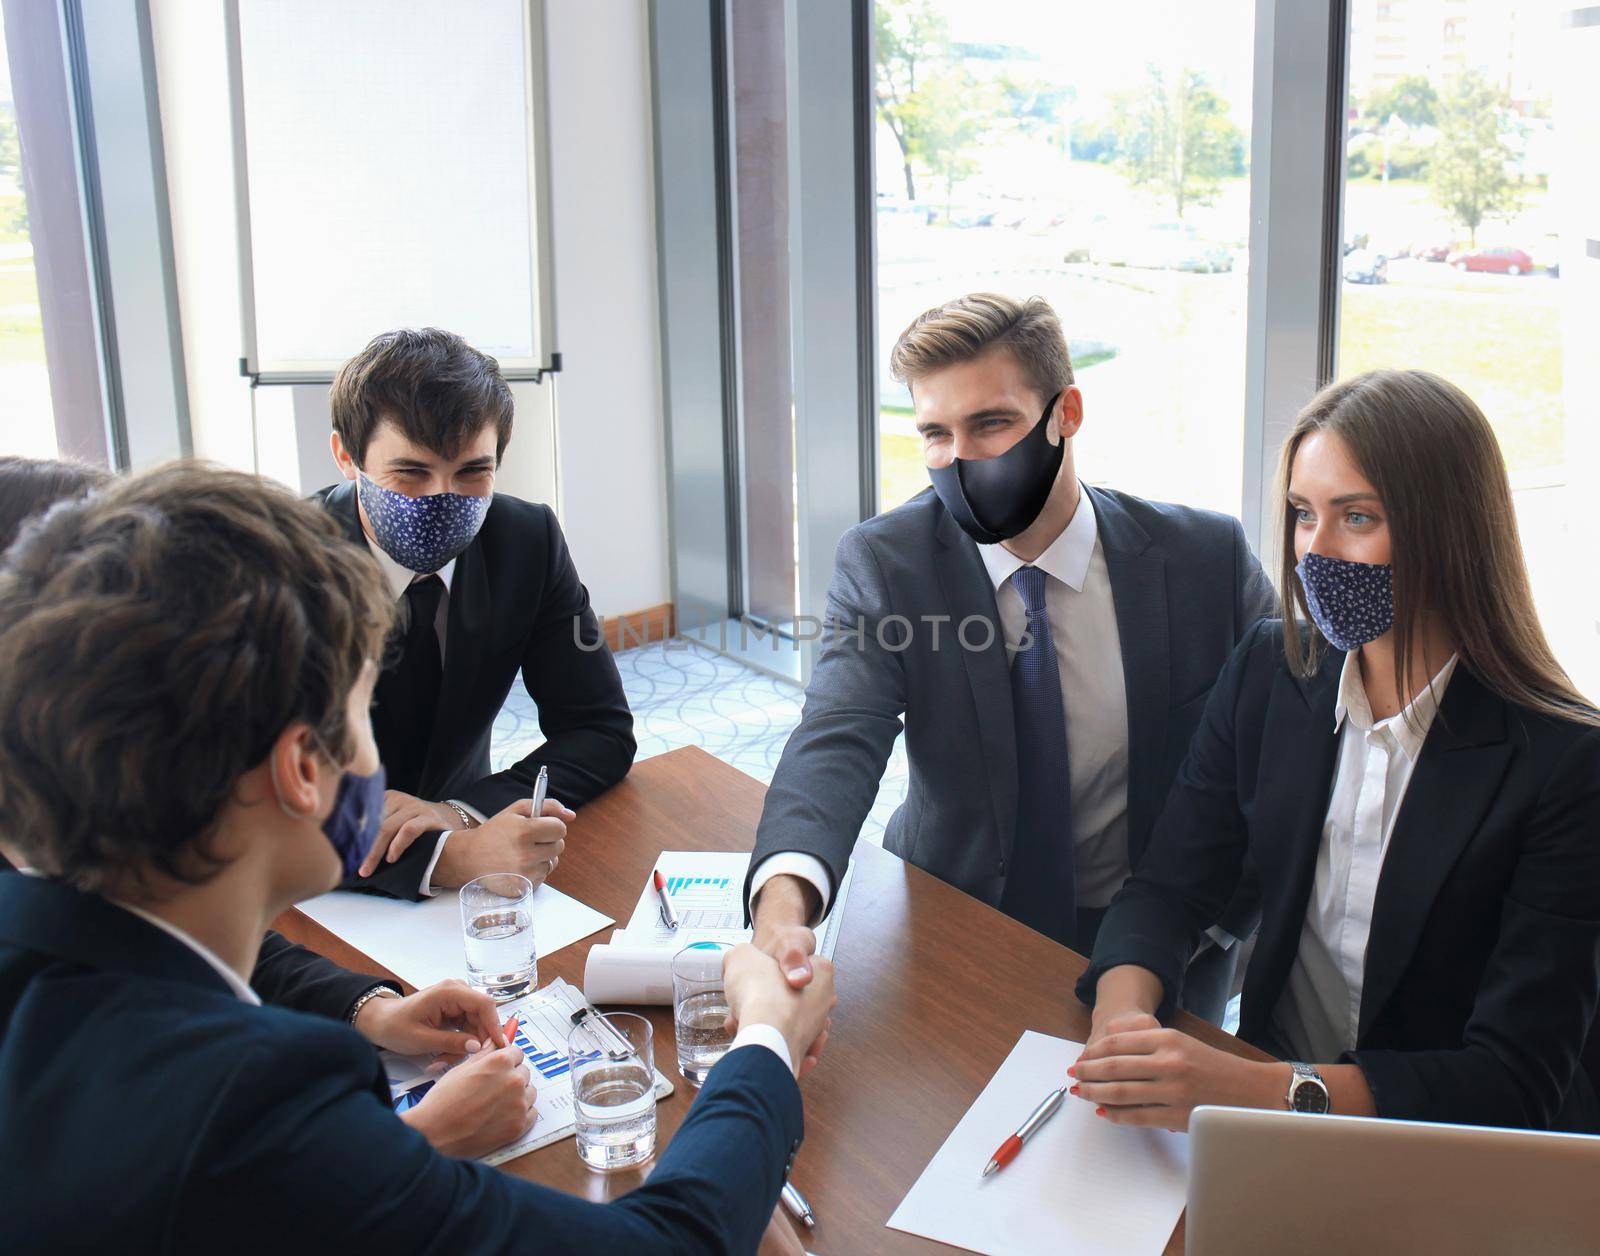 Businessman in preventive mask shaking hands to seal a deal with his partner and colleagues who also wear preventive masks in office